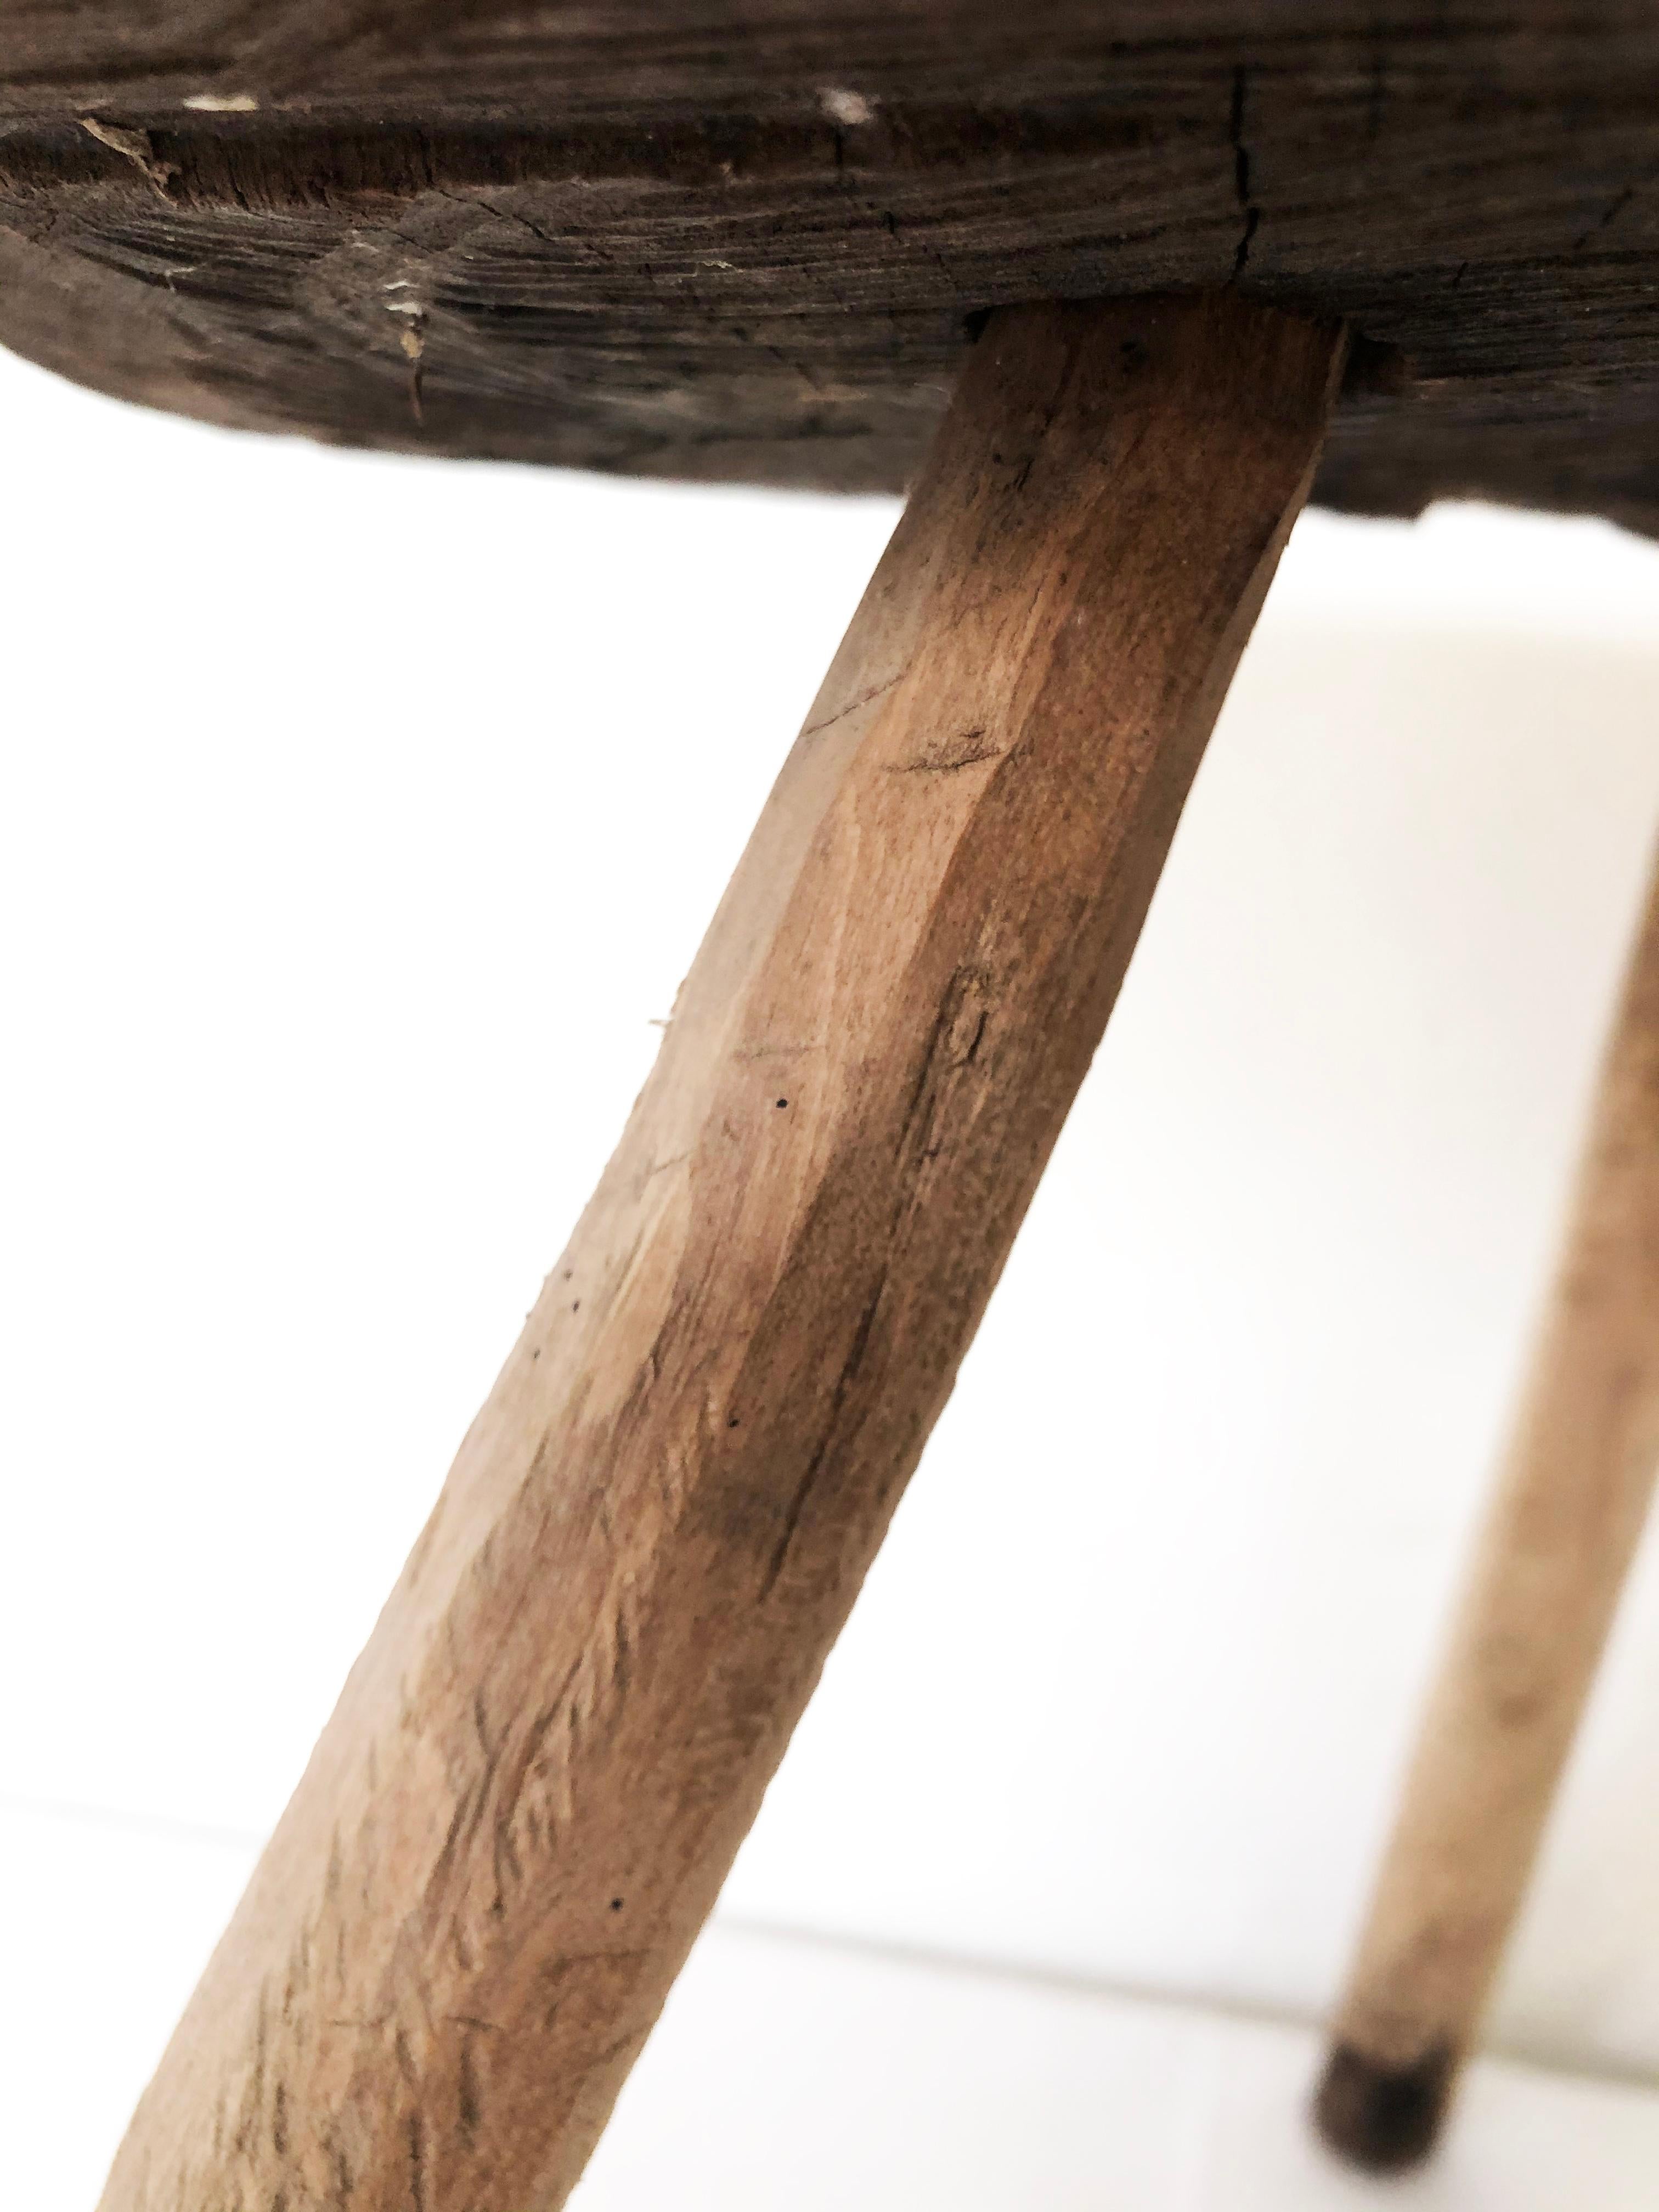 Rustic Late 19th Century Mezquite Milking Wood Stool with Thick Round Top